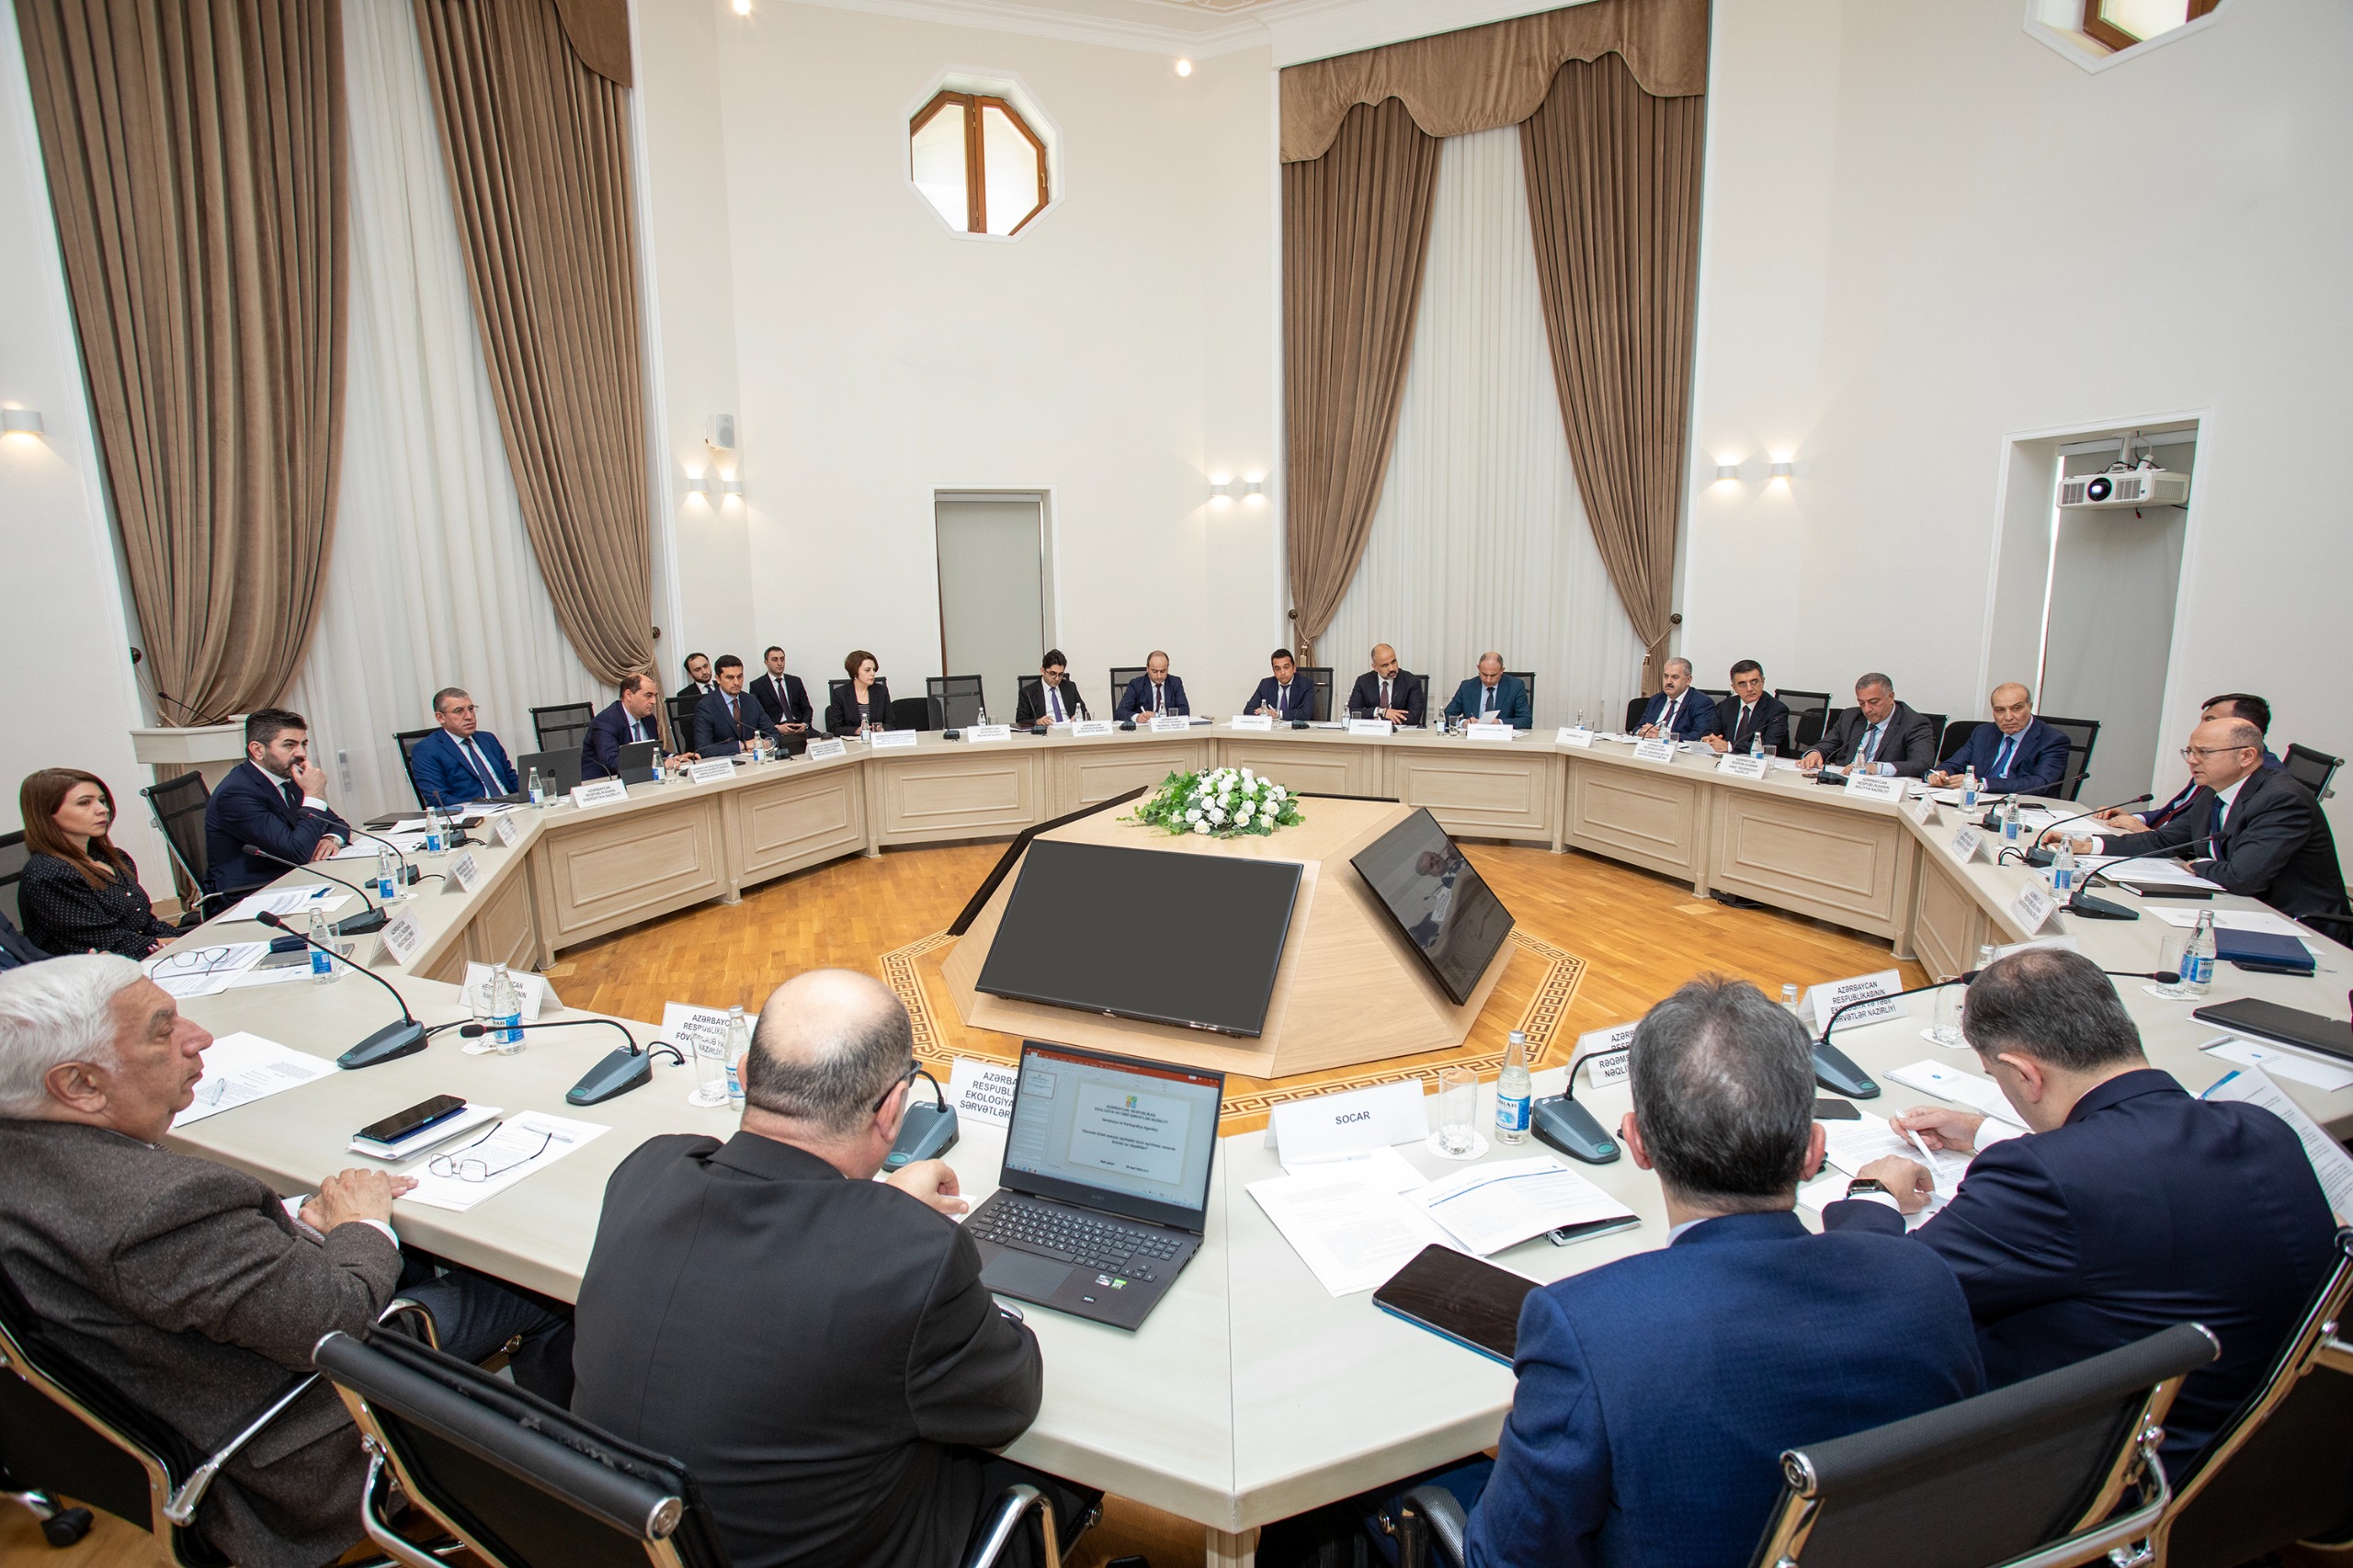 The next meeting of the Commission on the implementation of pilot projects in the field of use of renewable energy sources was held